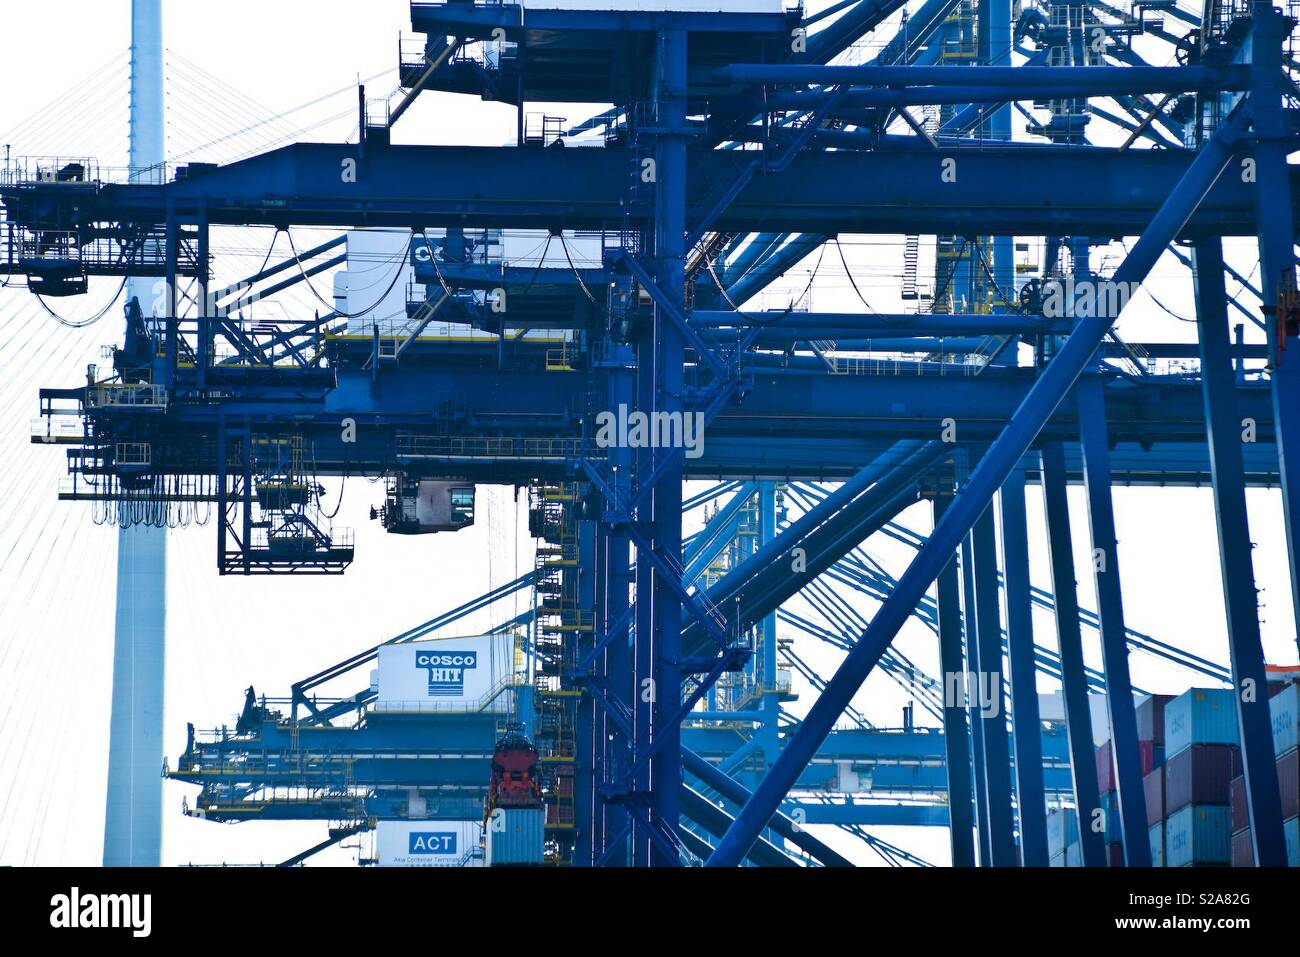 Blue cranes in industrial port Hong Kong Stock Photo